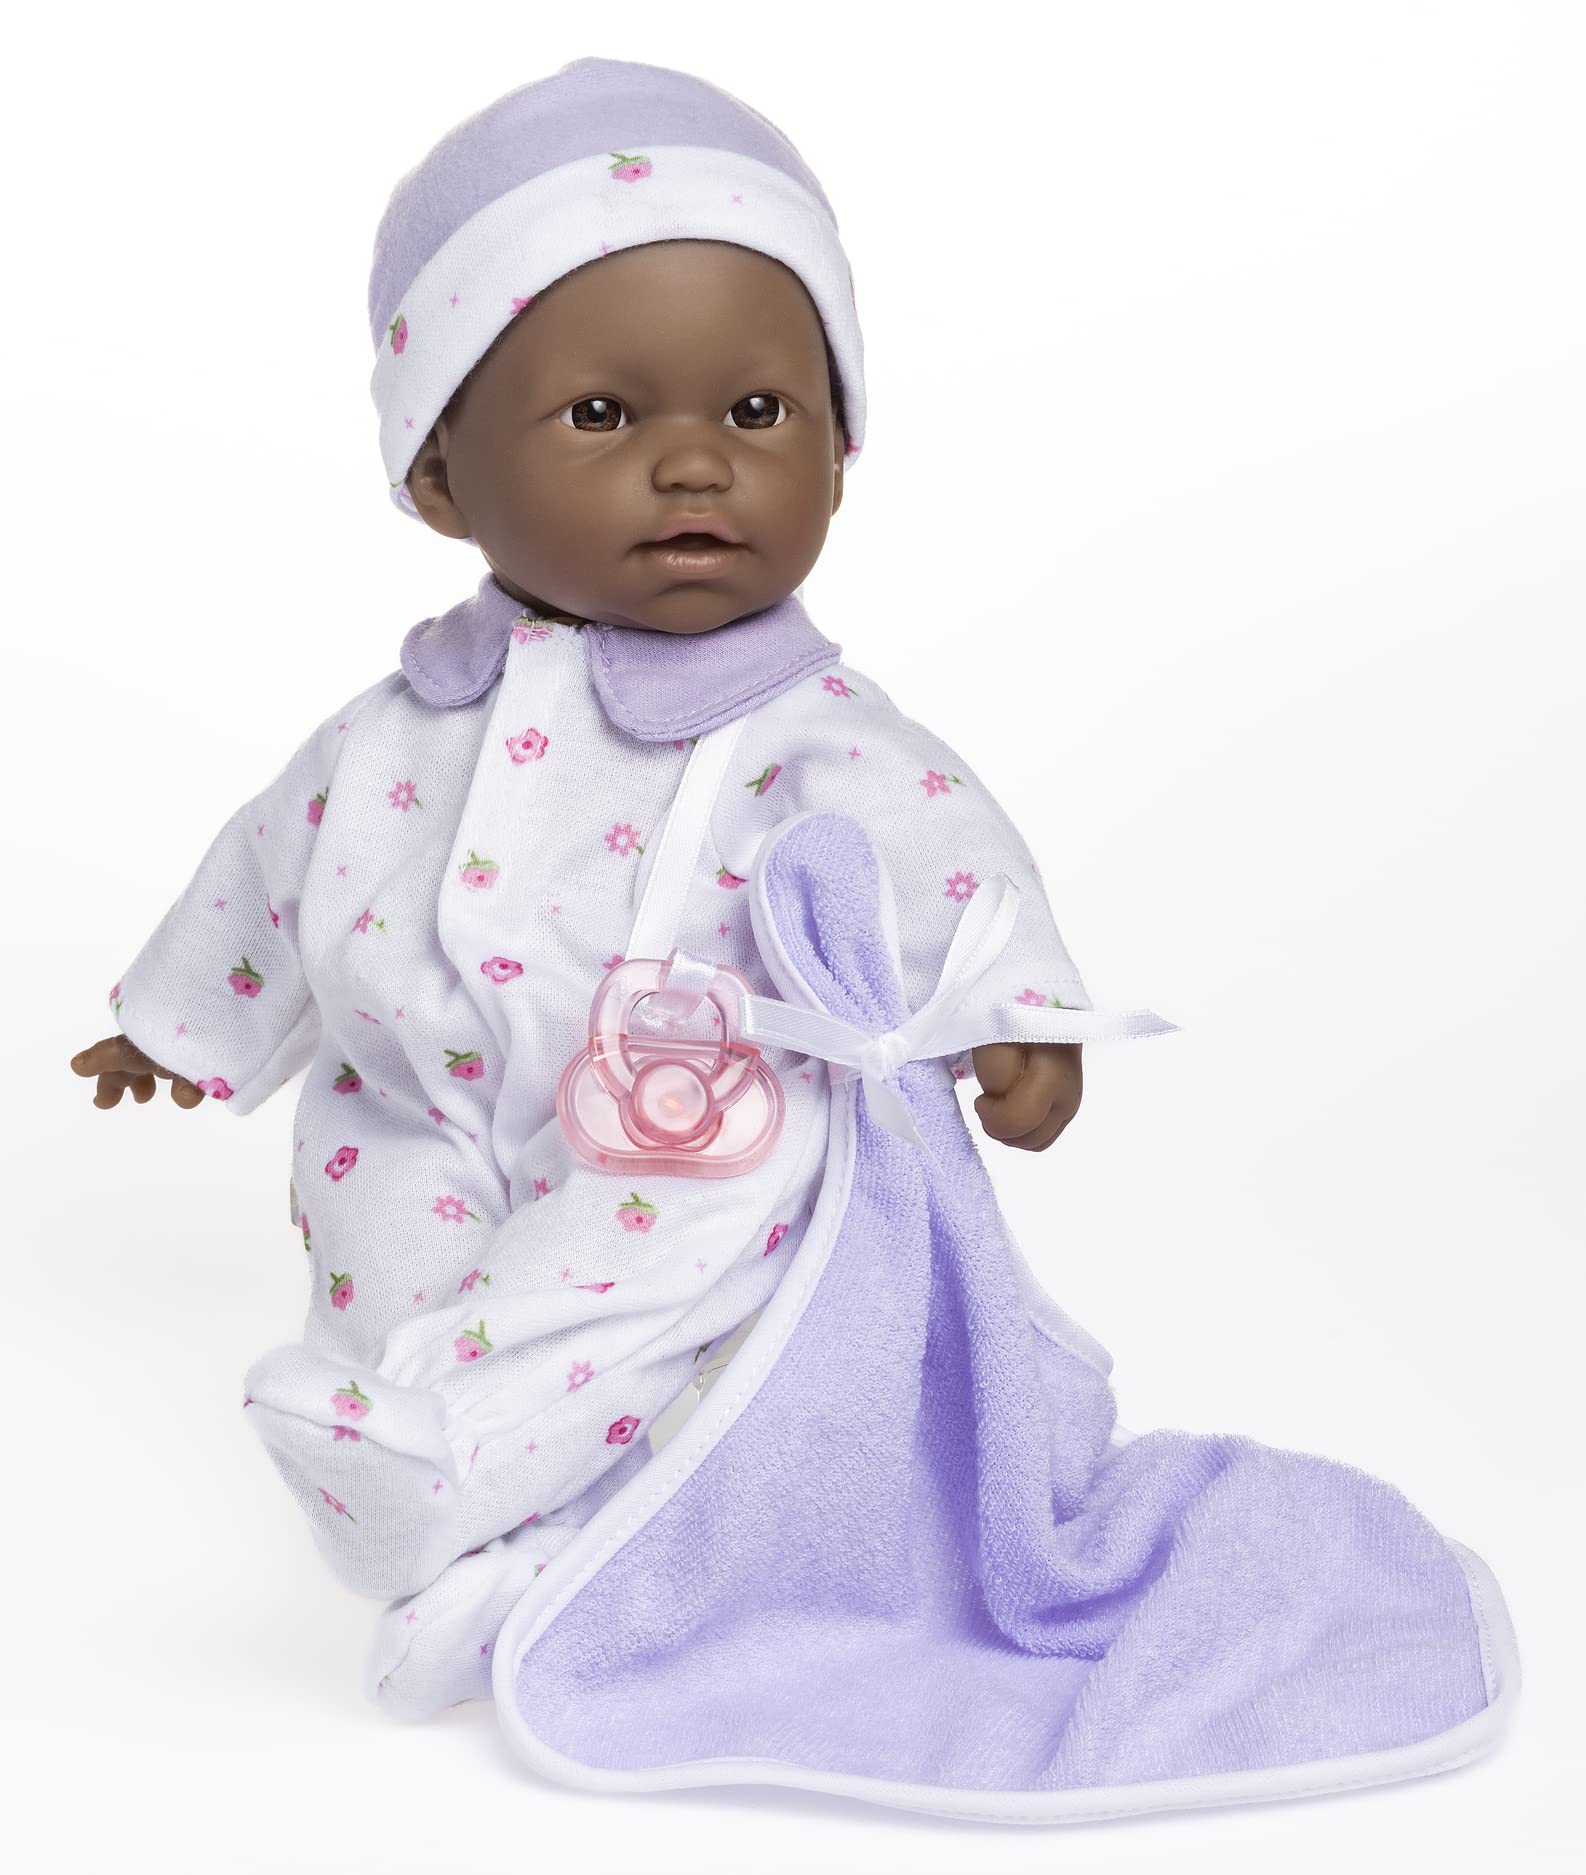 JC Toys La Baby Boutique African American 11 inch Small Soft Body Baby Doll dressed in Purple for Children 12 Months and older